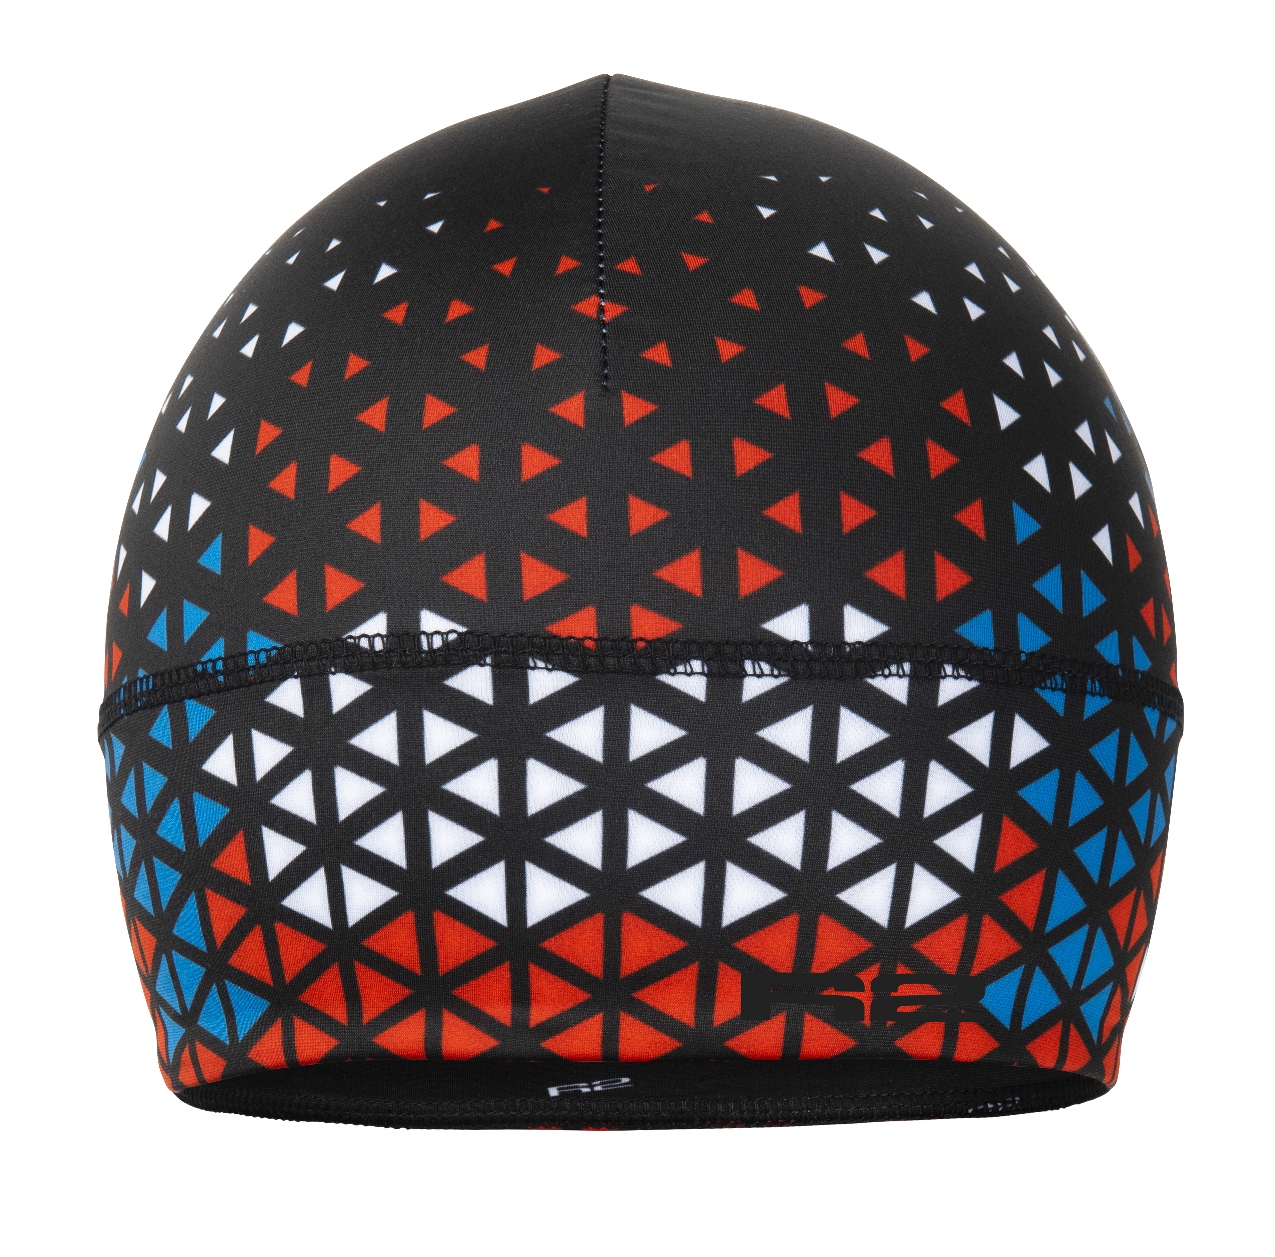 SPORTS FUNCTIONAL HAT R2 DRIP ATK09D